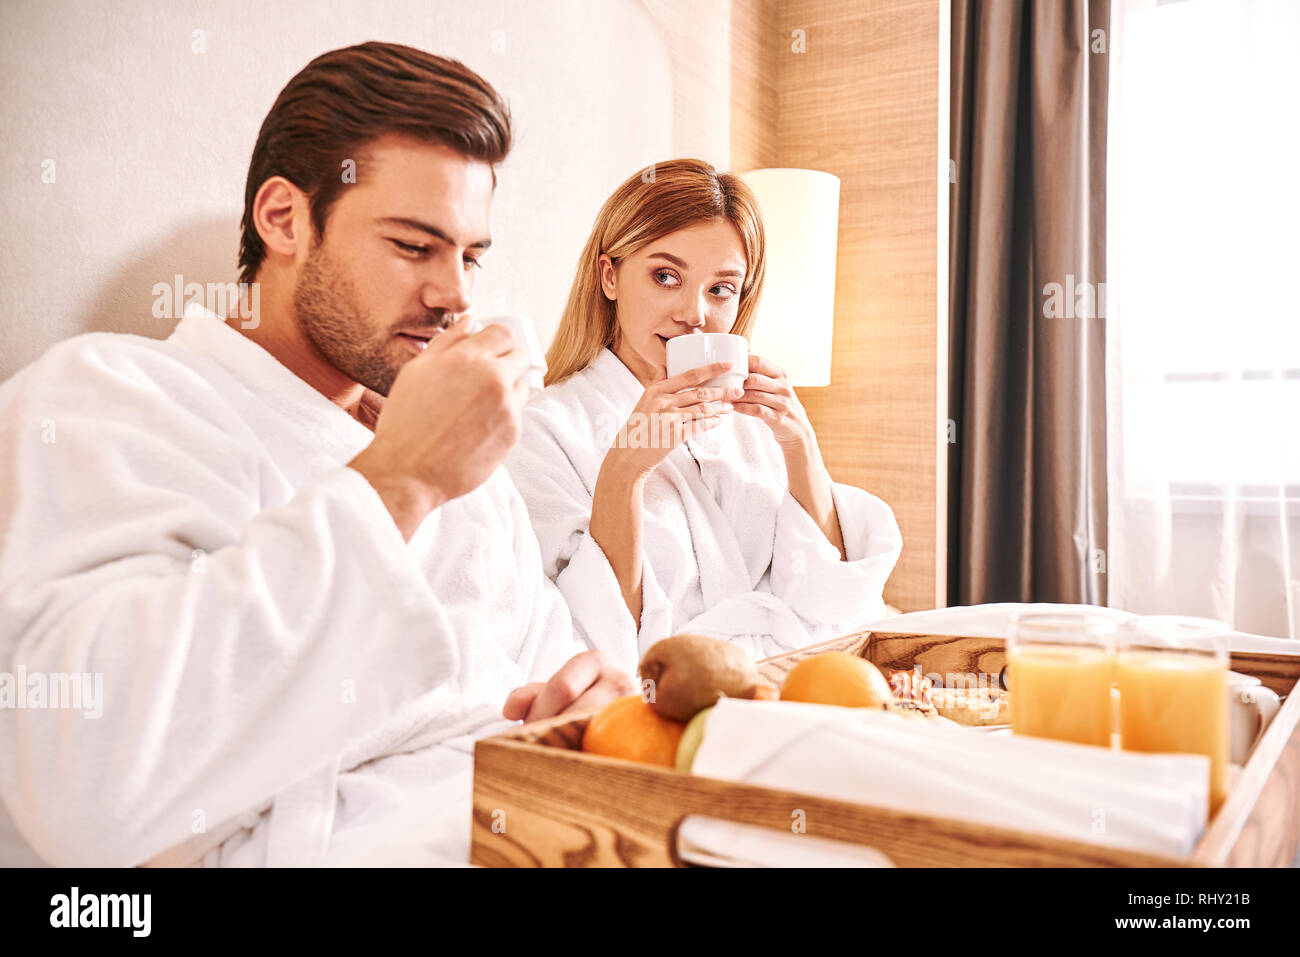 Useful breakfast. Couple are eating in hotel room bed together. Love story. Drinking morning coffee Stock Photo